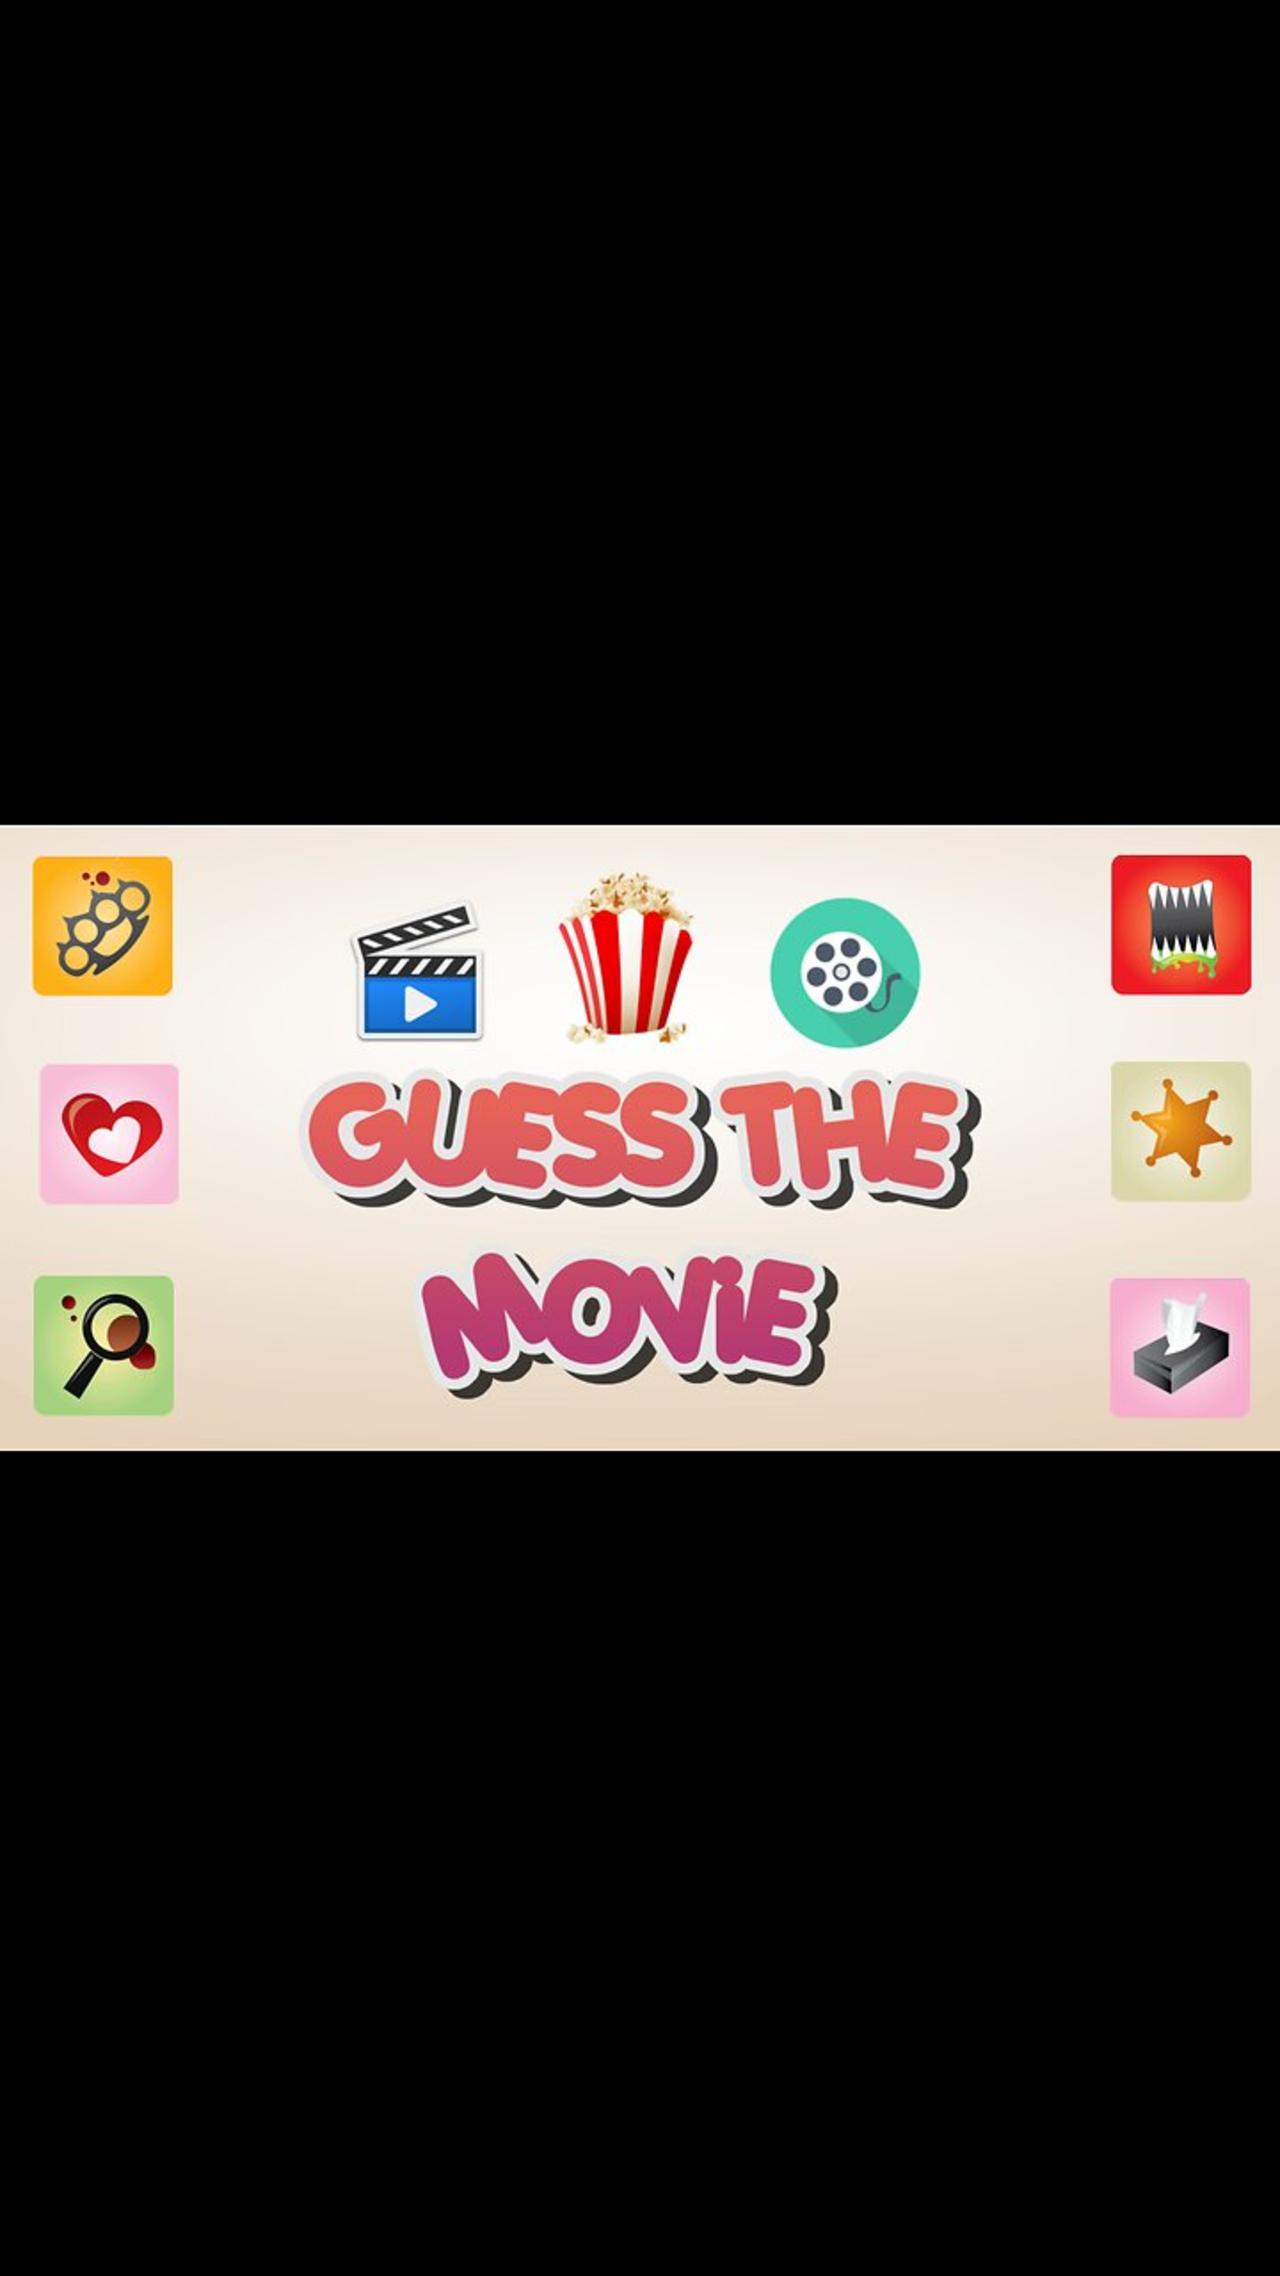 "Ultimate Movie Challenge: Can You Guess Them All? 🎬 Test Your Film Knowledge Now!"